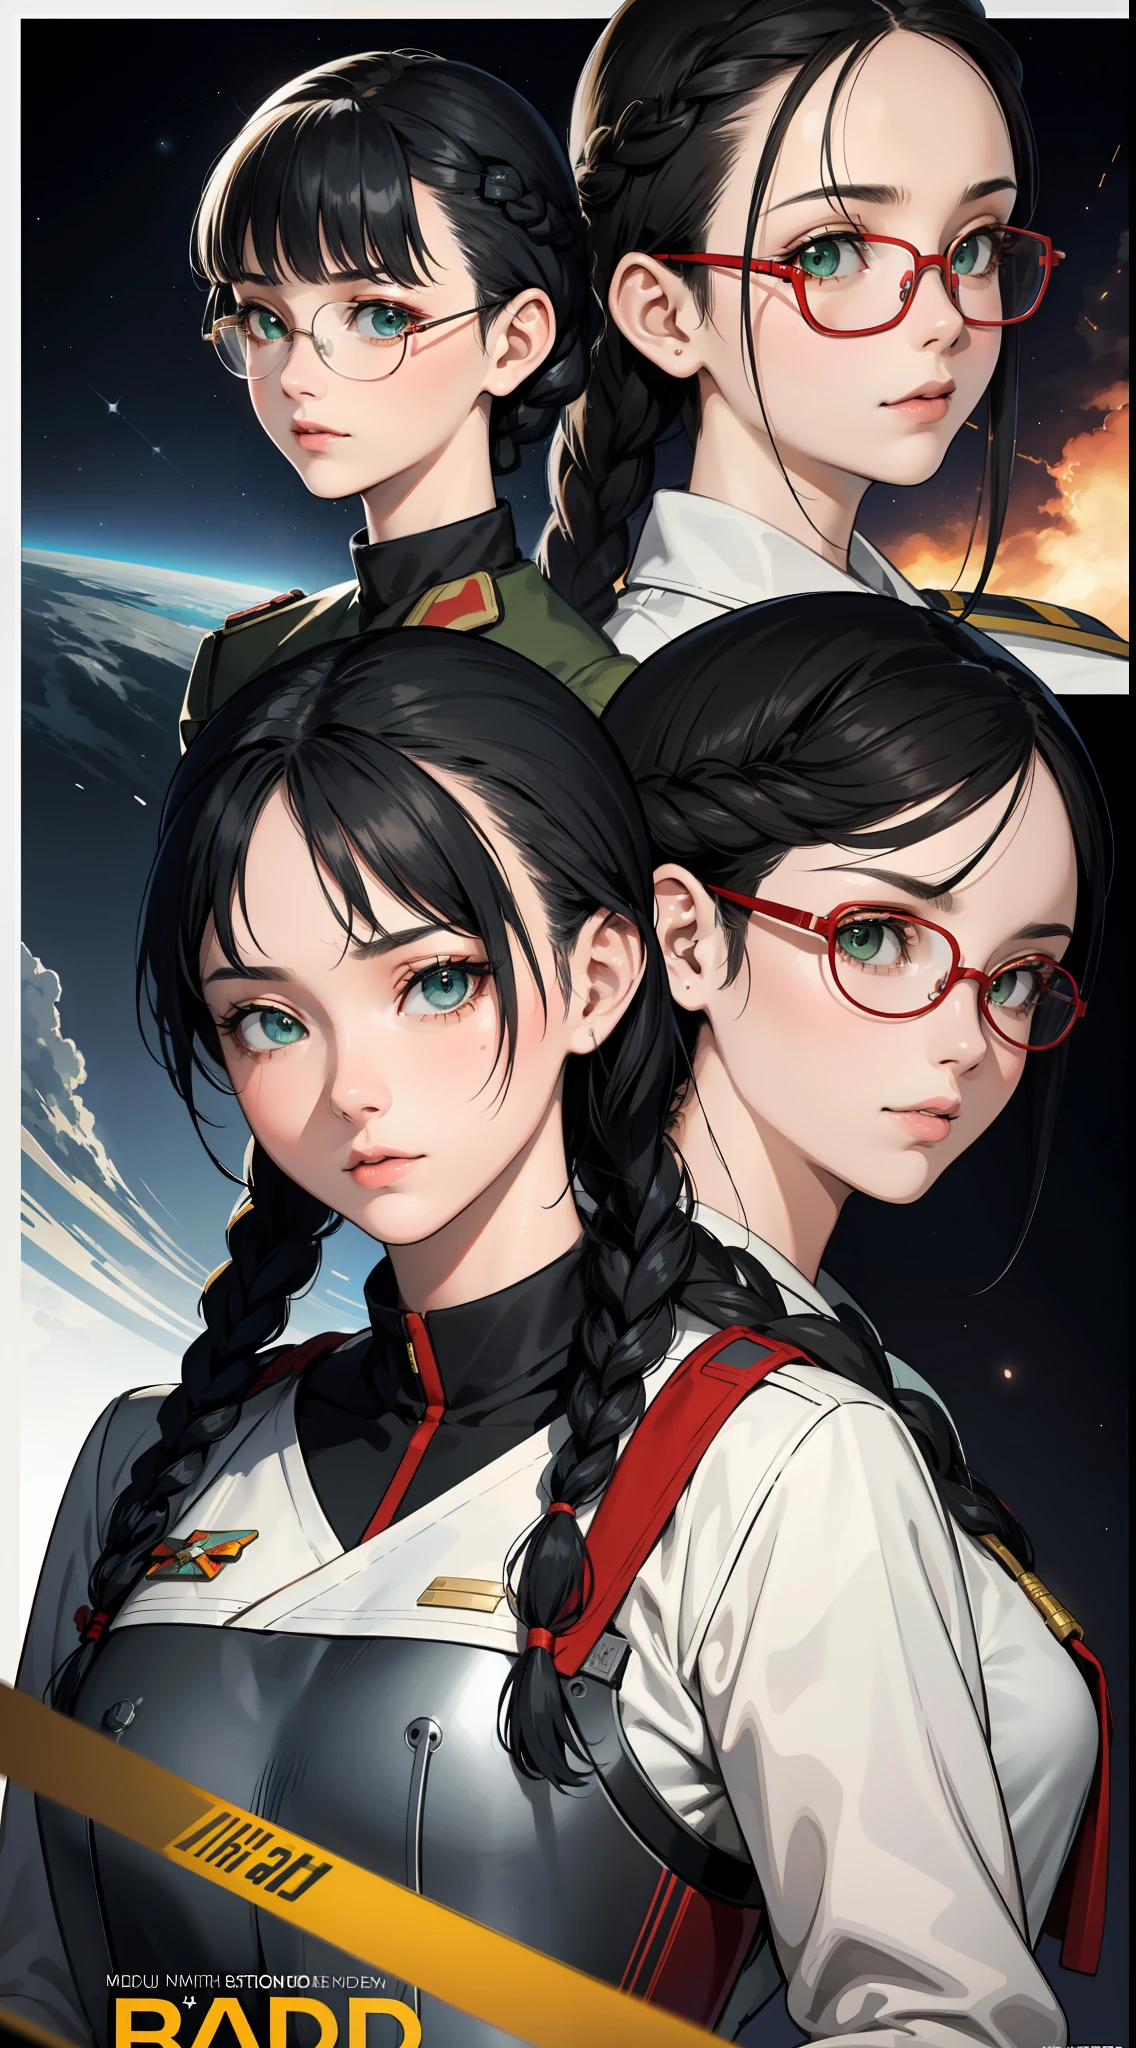 Movie Poster,((Braid Hairstyle : 1.5)),Anime Reference 86 ,Science Fiction,Sci-Fi,Movies,War Action Movies,Space,Atmosphere,Sky,Battleship,Multiple Characters,Women,Adults,Green Eyes,Black Hair,(Pia bangs hairstyle) : 1.8 ),(Red Glasses),General Uniform,White Commander Uniform,Realistic Face Details,Realism,3D Face,